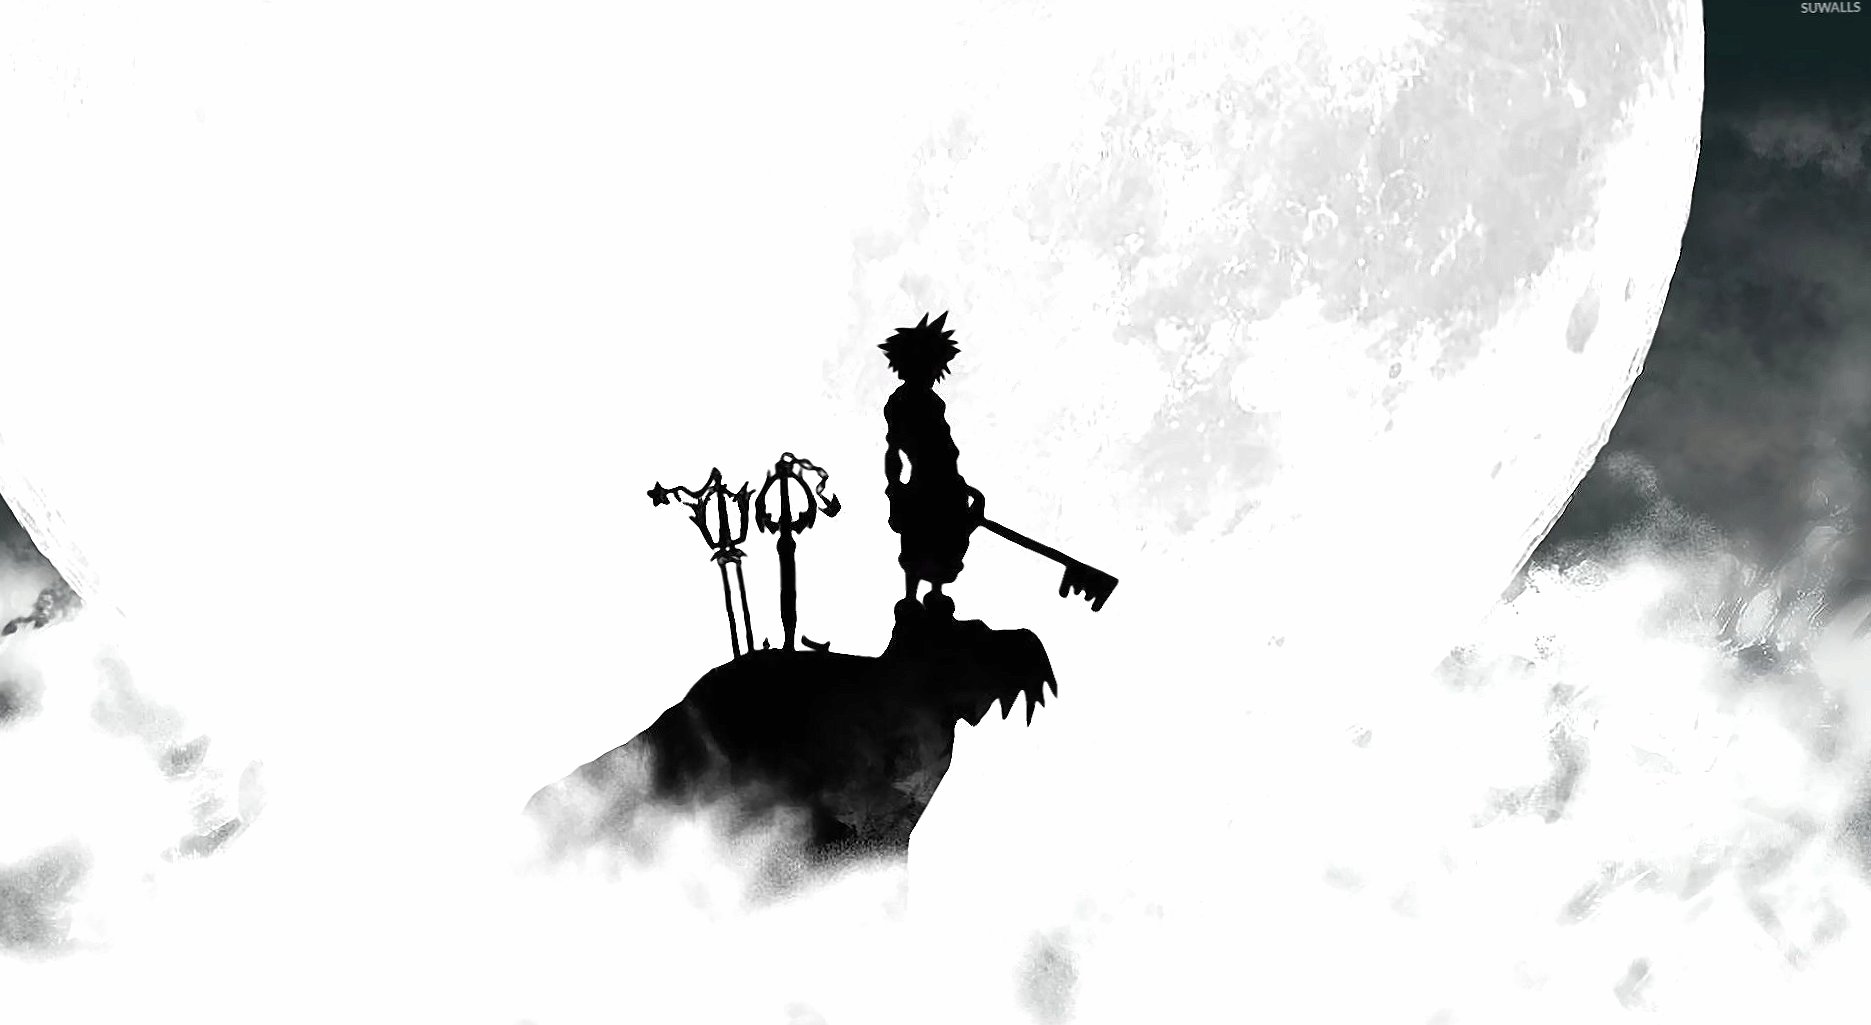 Kingdom Hearts 3 warrior on the cliff wallpapers HD quality